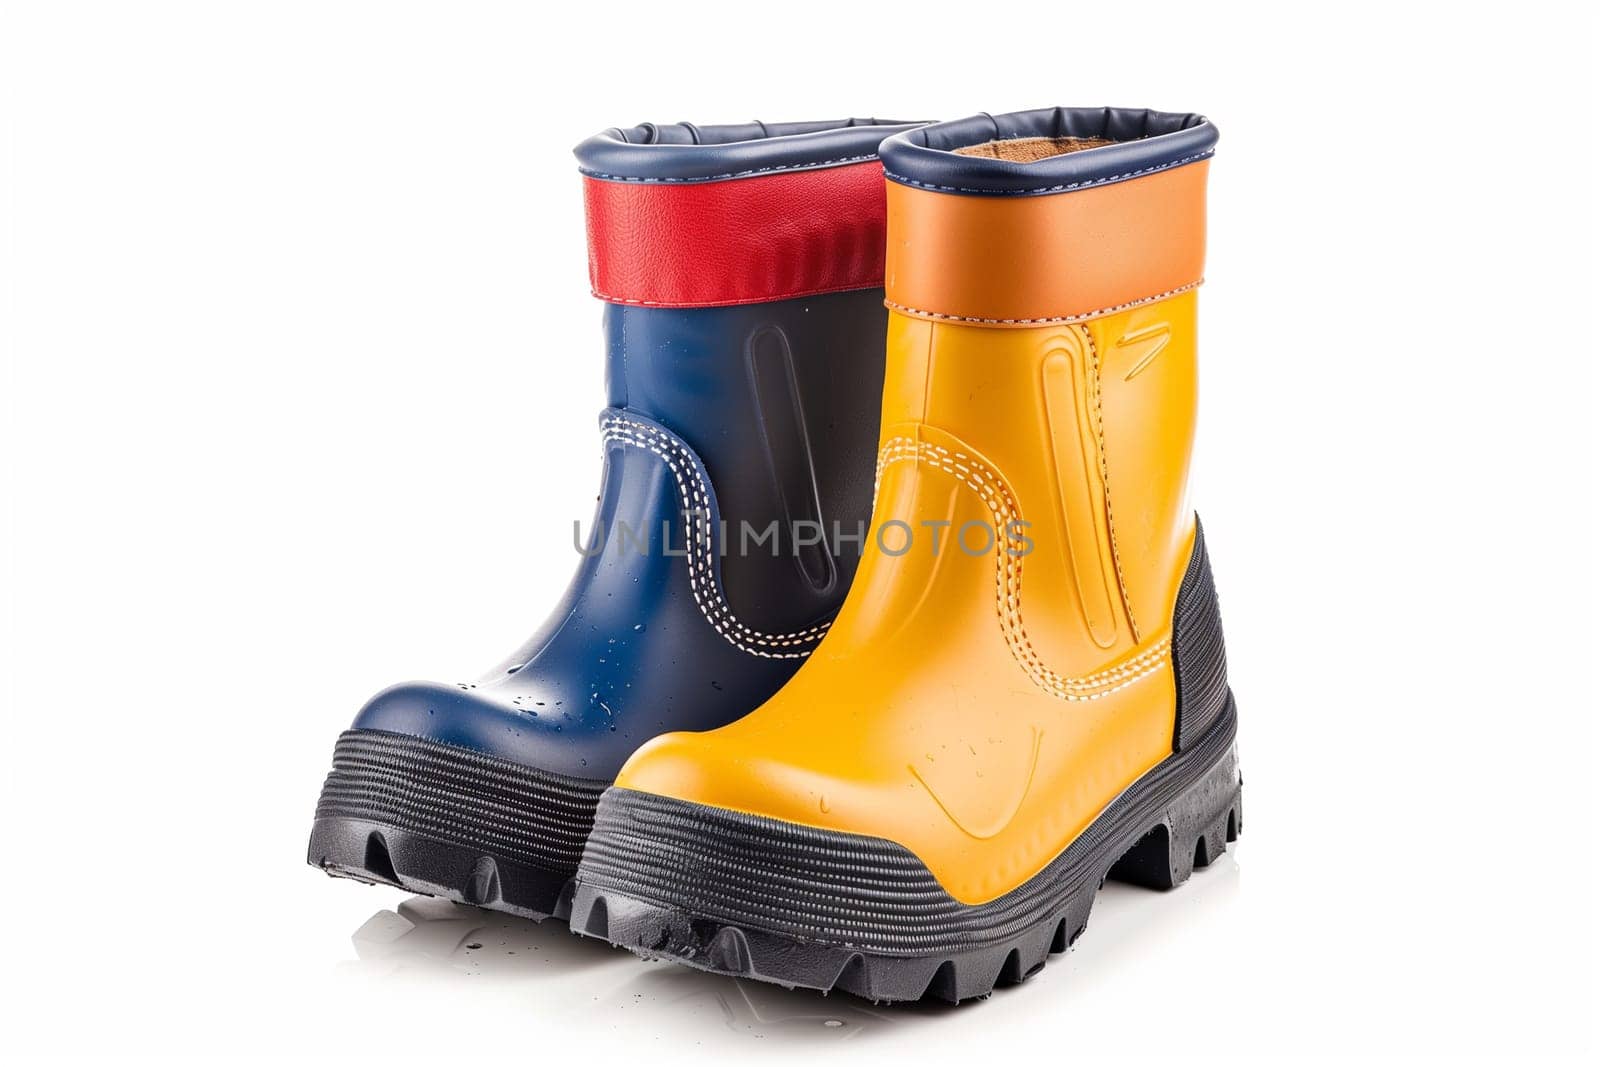 A pair of colorful childrens rain boots standing on a white background.